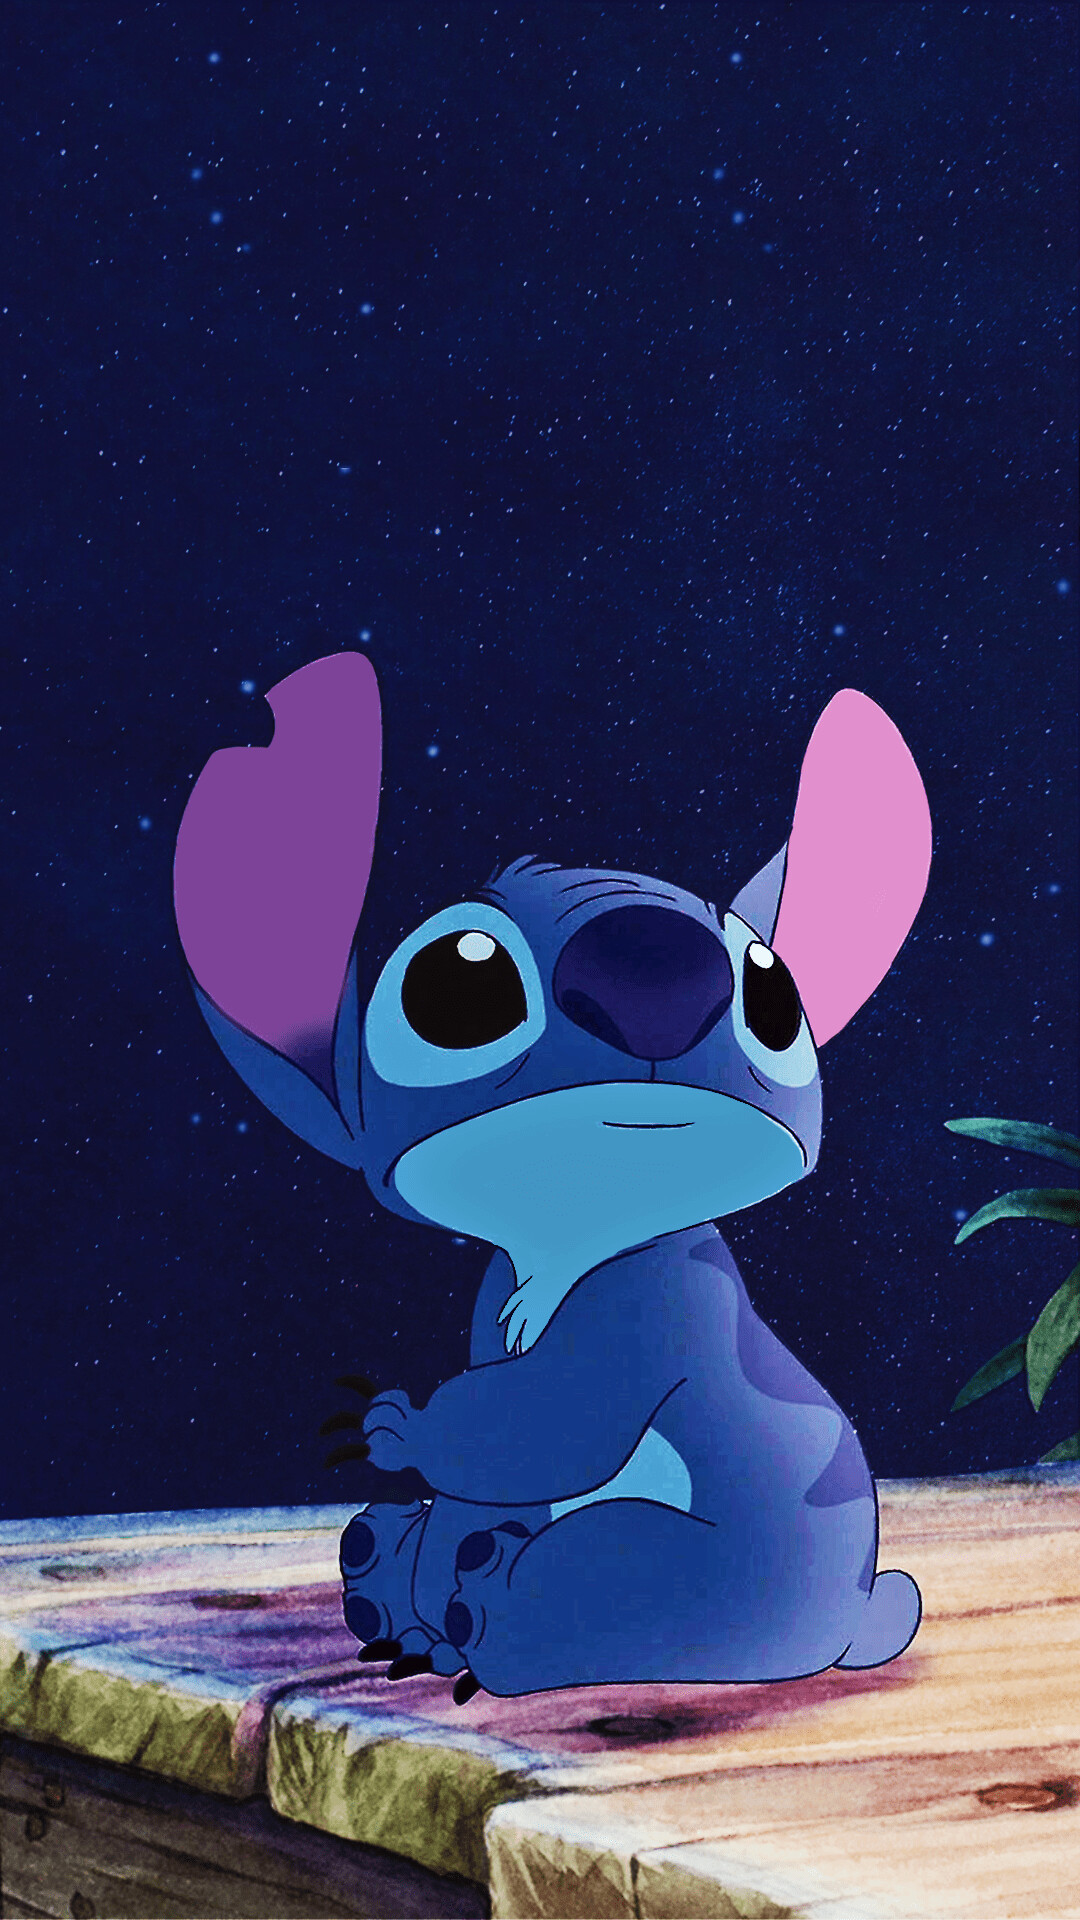 Lilo and Stitch: Experiment 626, was created to cause and create chaos around the galaxy. 1080x1920 Full HD Wallpaper.